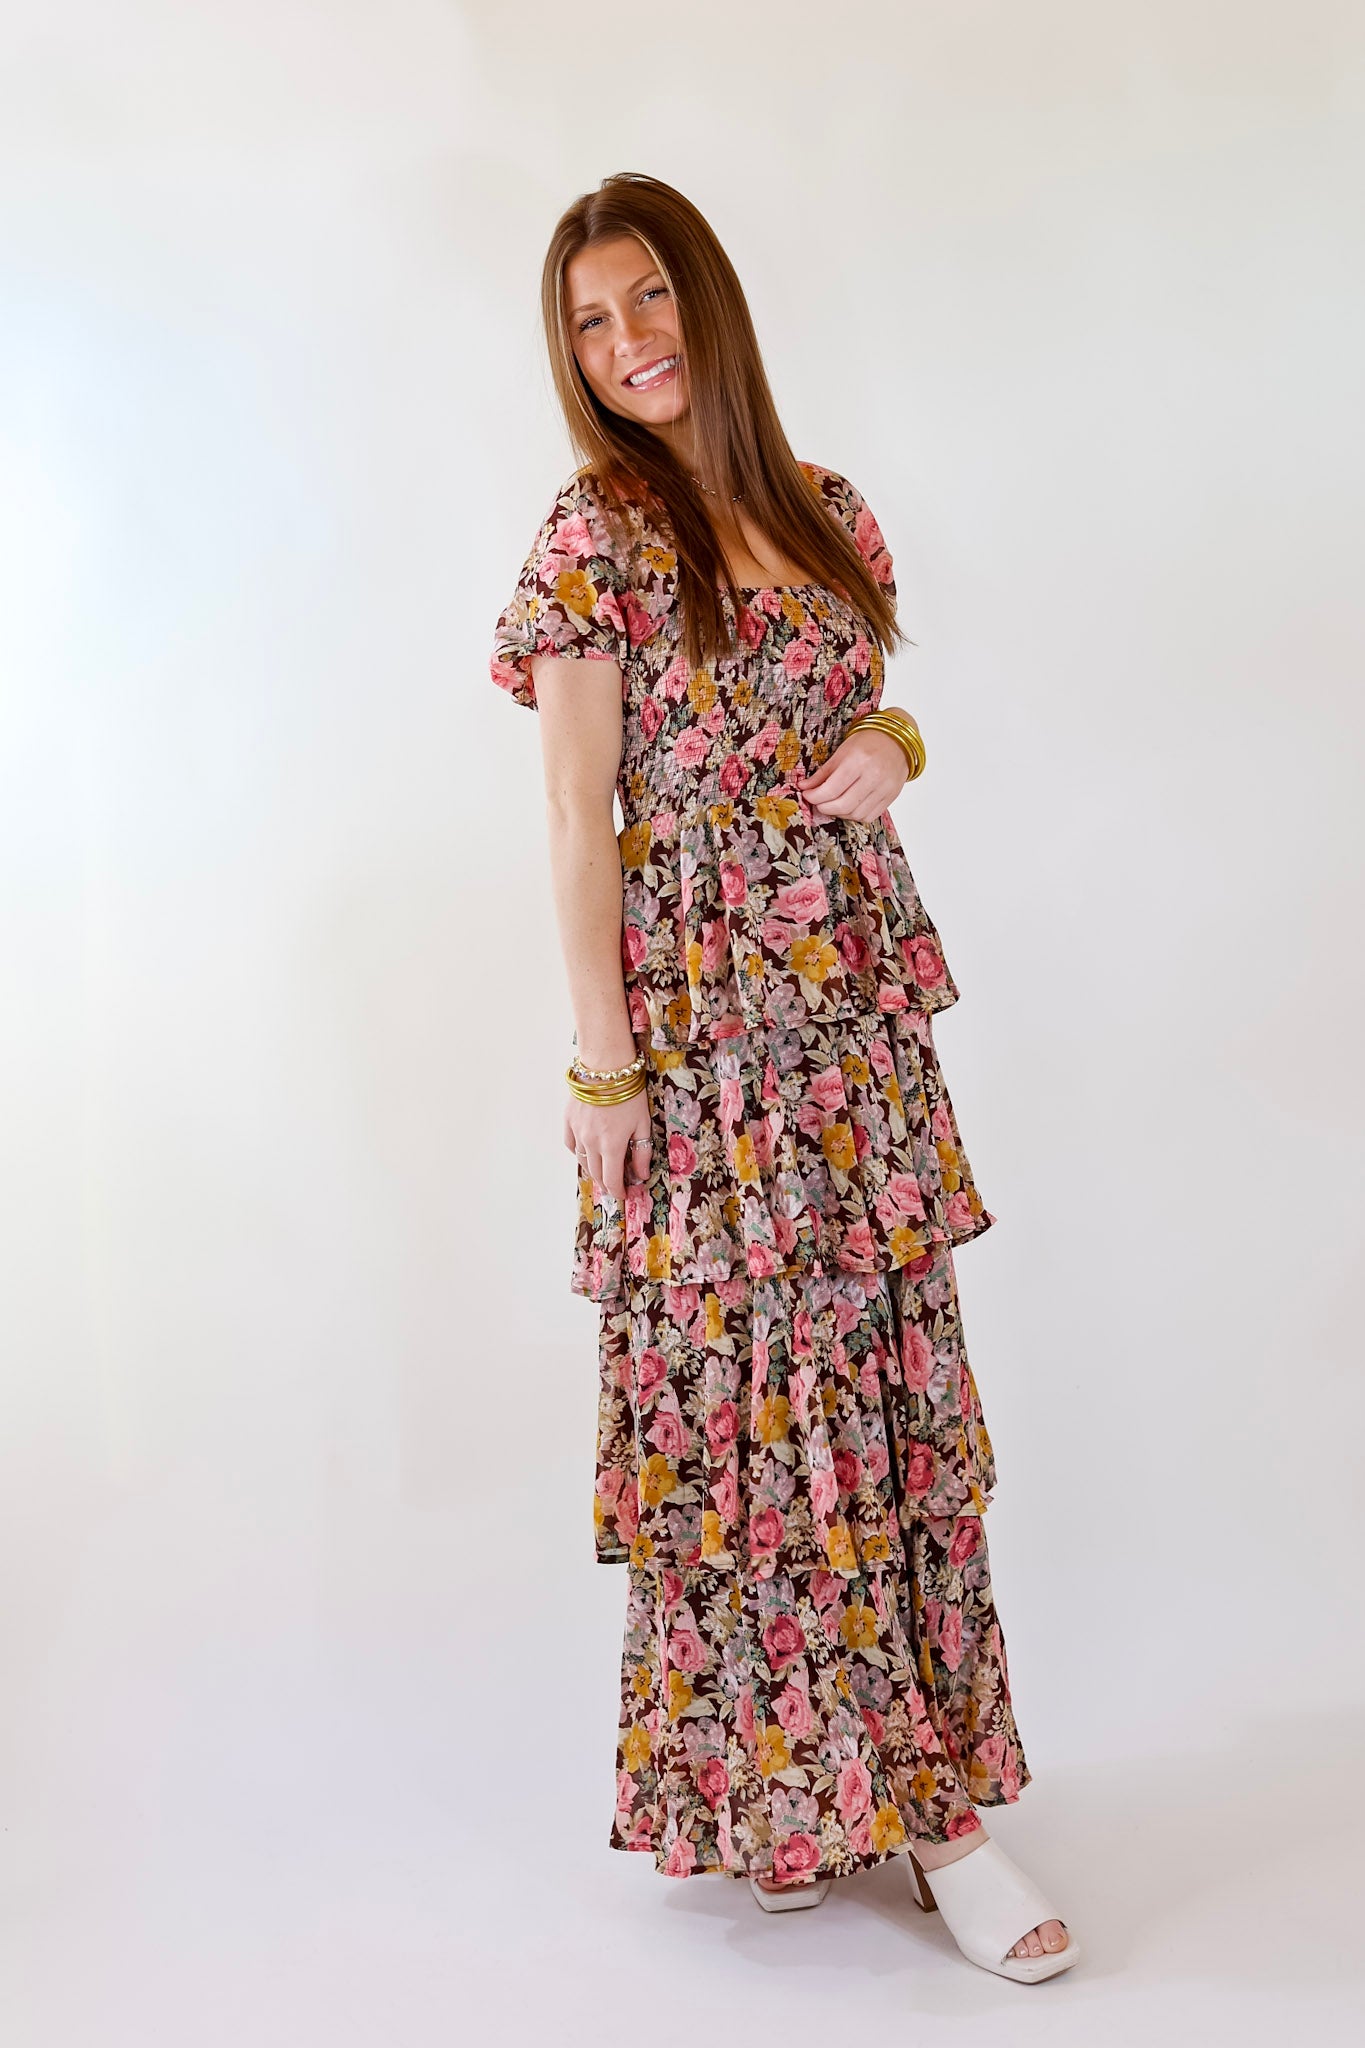 Fun Feeling Floral Tiered Maxi Dress with Smocked Balloon Sleeves in Brown Mix - Giddy Up Glamour Boutique